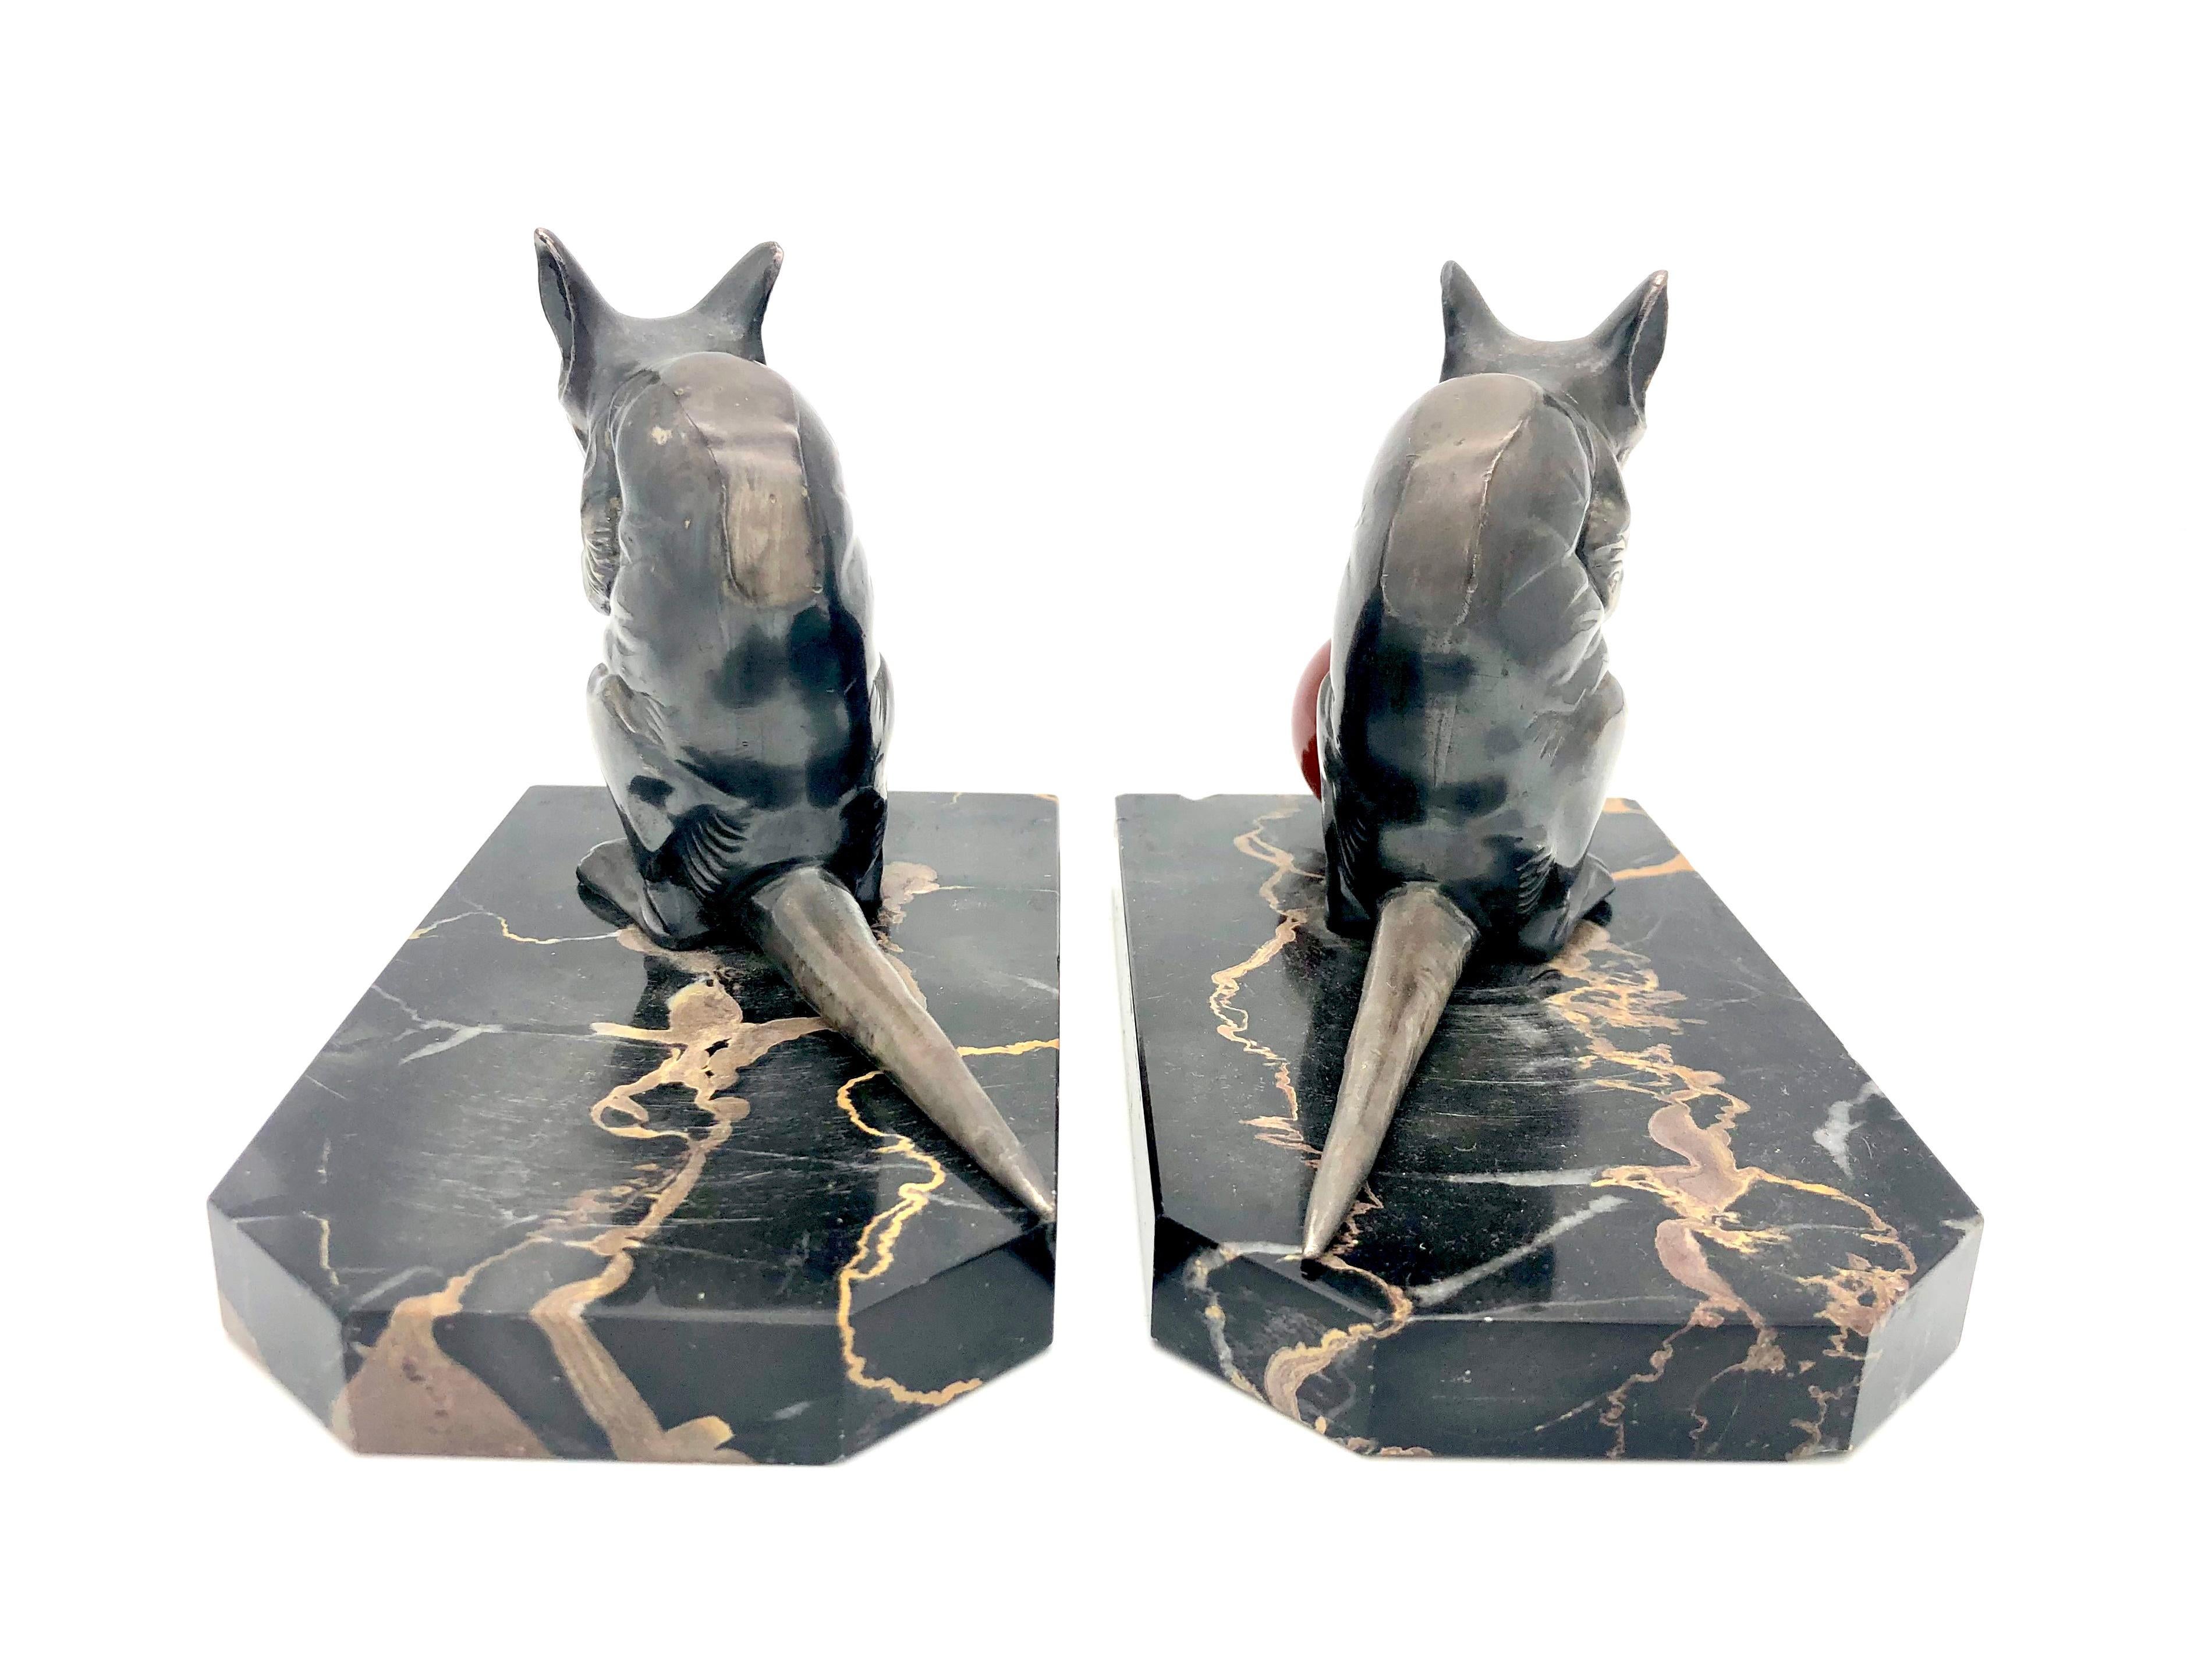 French Antique Art Deco Sculpture Mice Signed H. Moreau Metal Bakelite Marble Bookends  For Sale